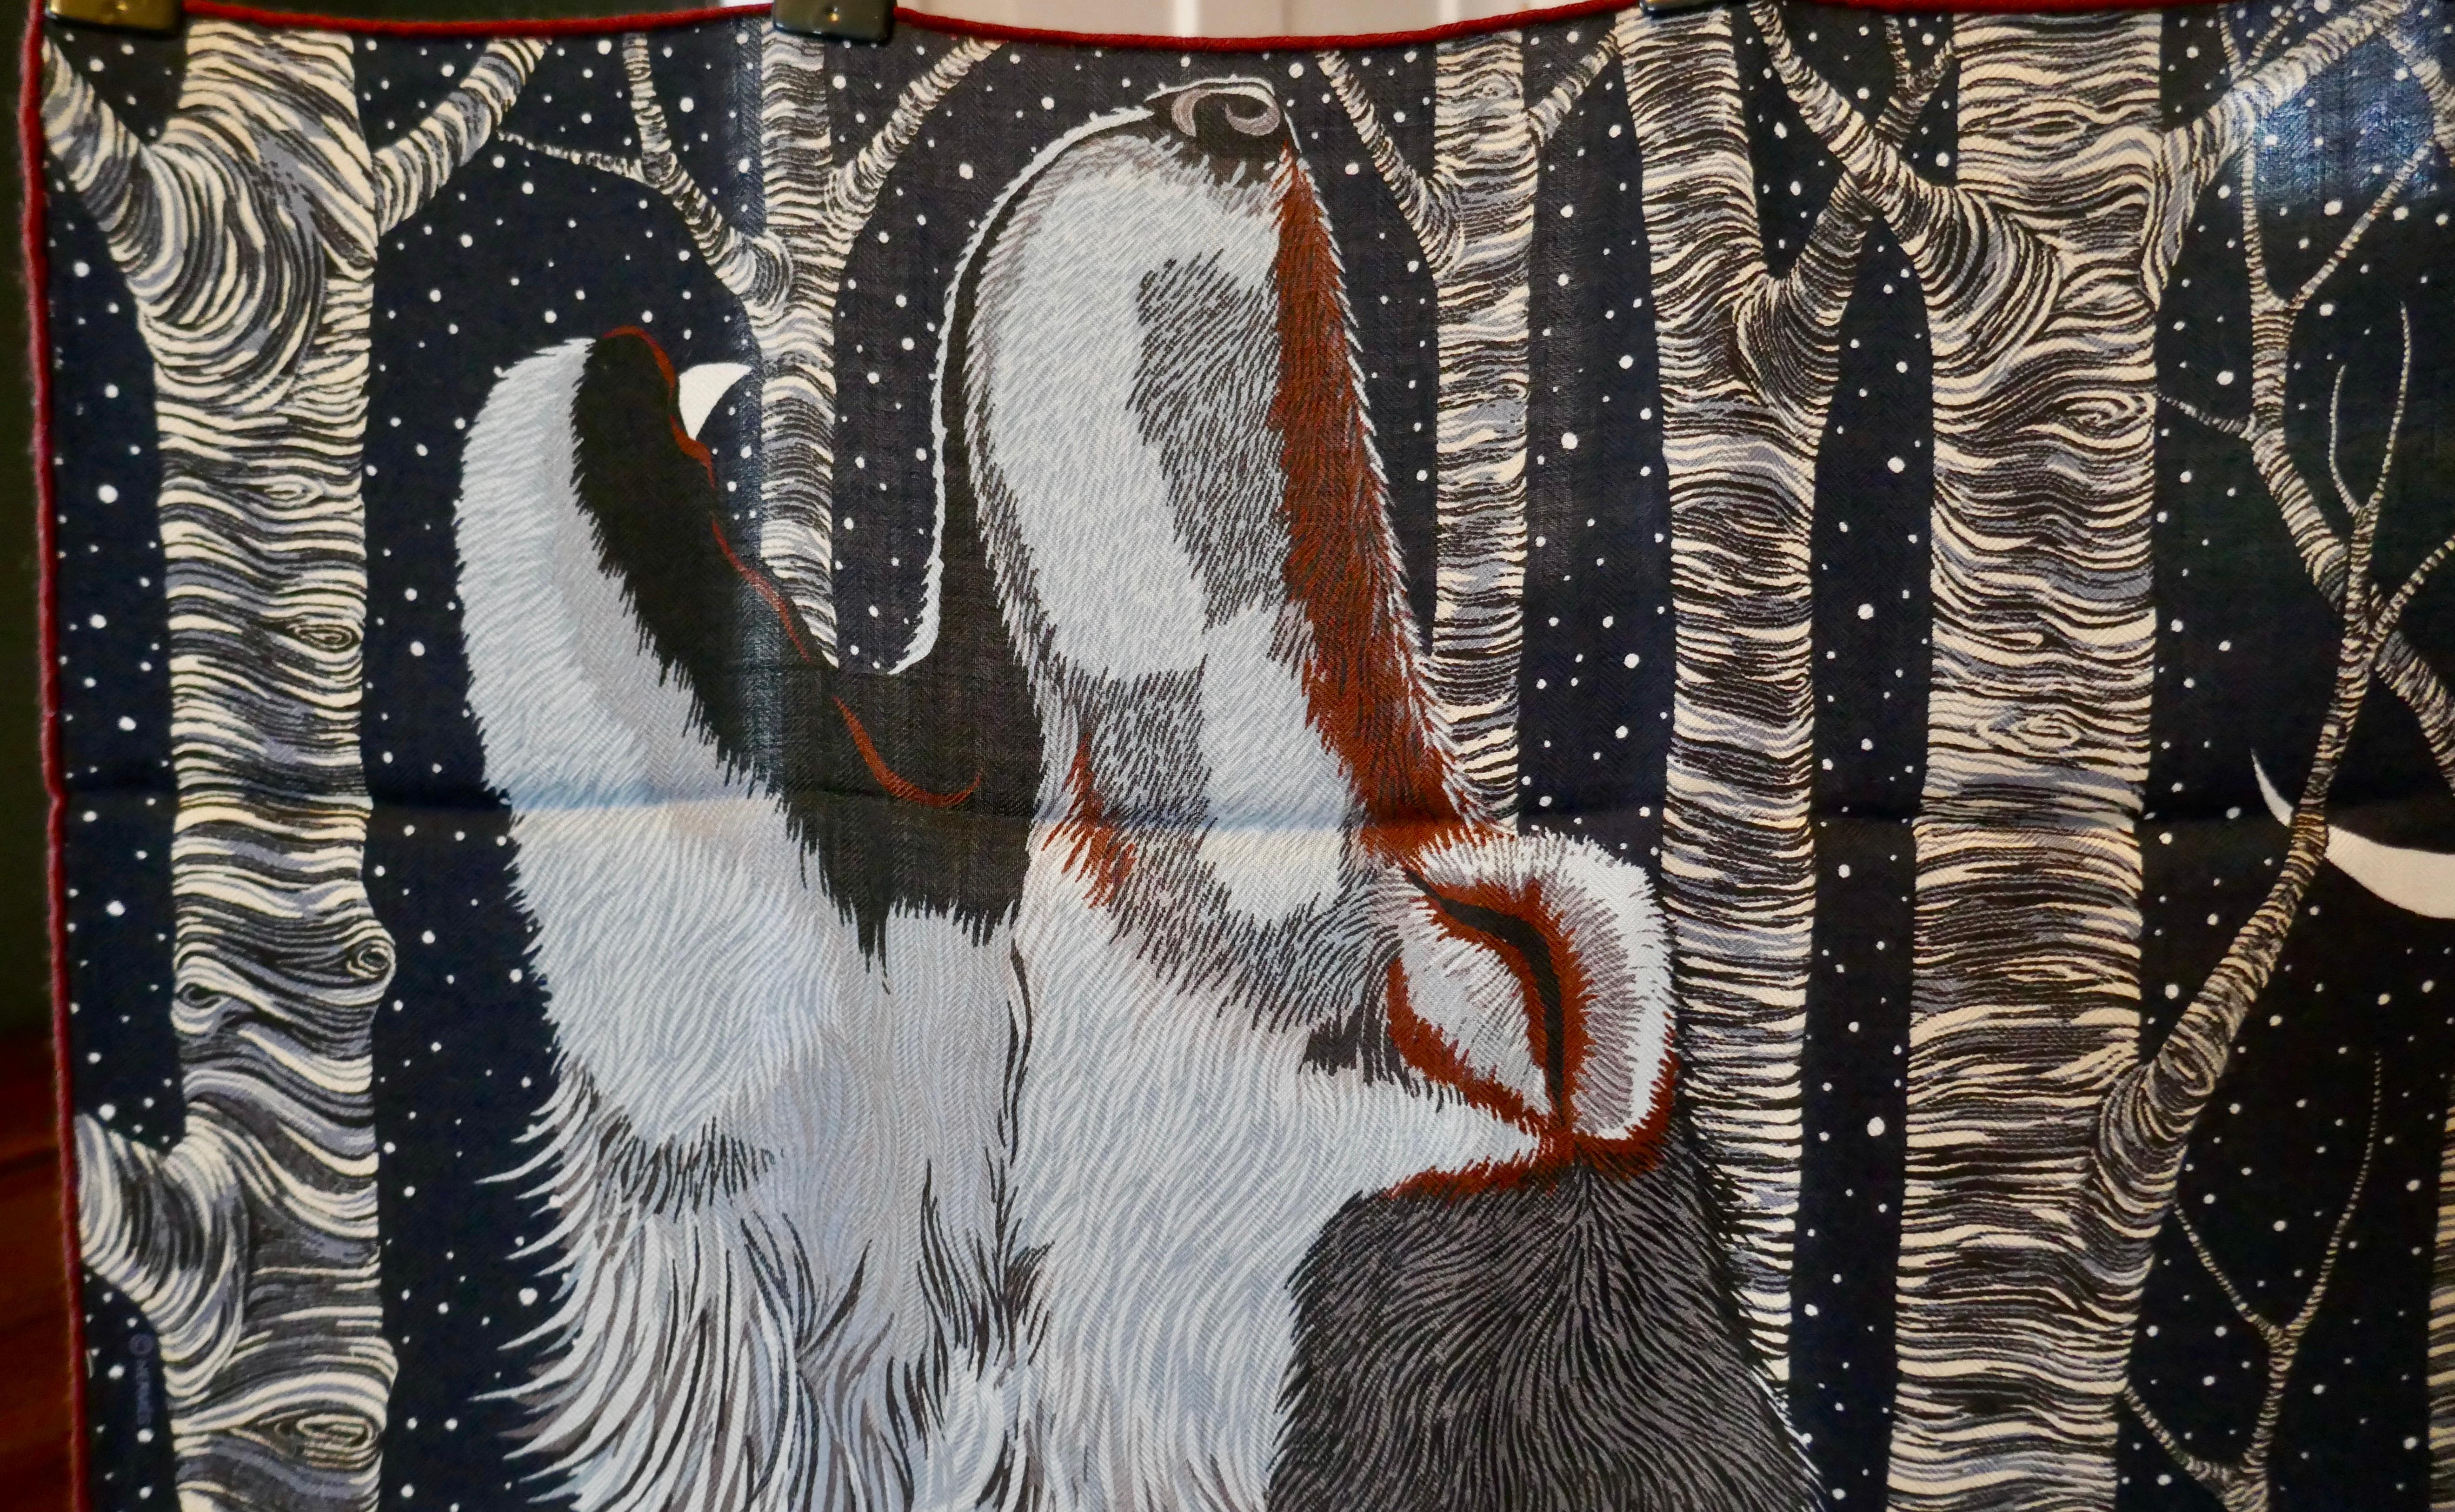 Hermes Very Special Issue Cashmere and Silk Scarf “AW00000” by Alice Shirley  

In a Burgundy and navy Pallet he is howling at the new moon, the design is by Alice Shirley issued in 2018 Luxurious cashmere scarf with little silk in the mix